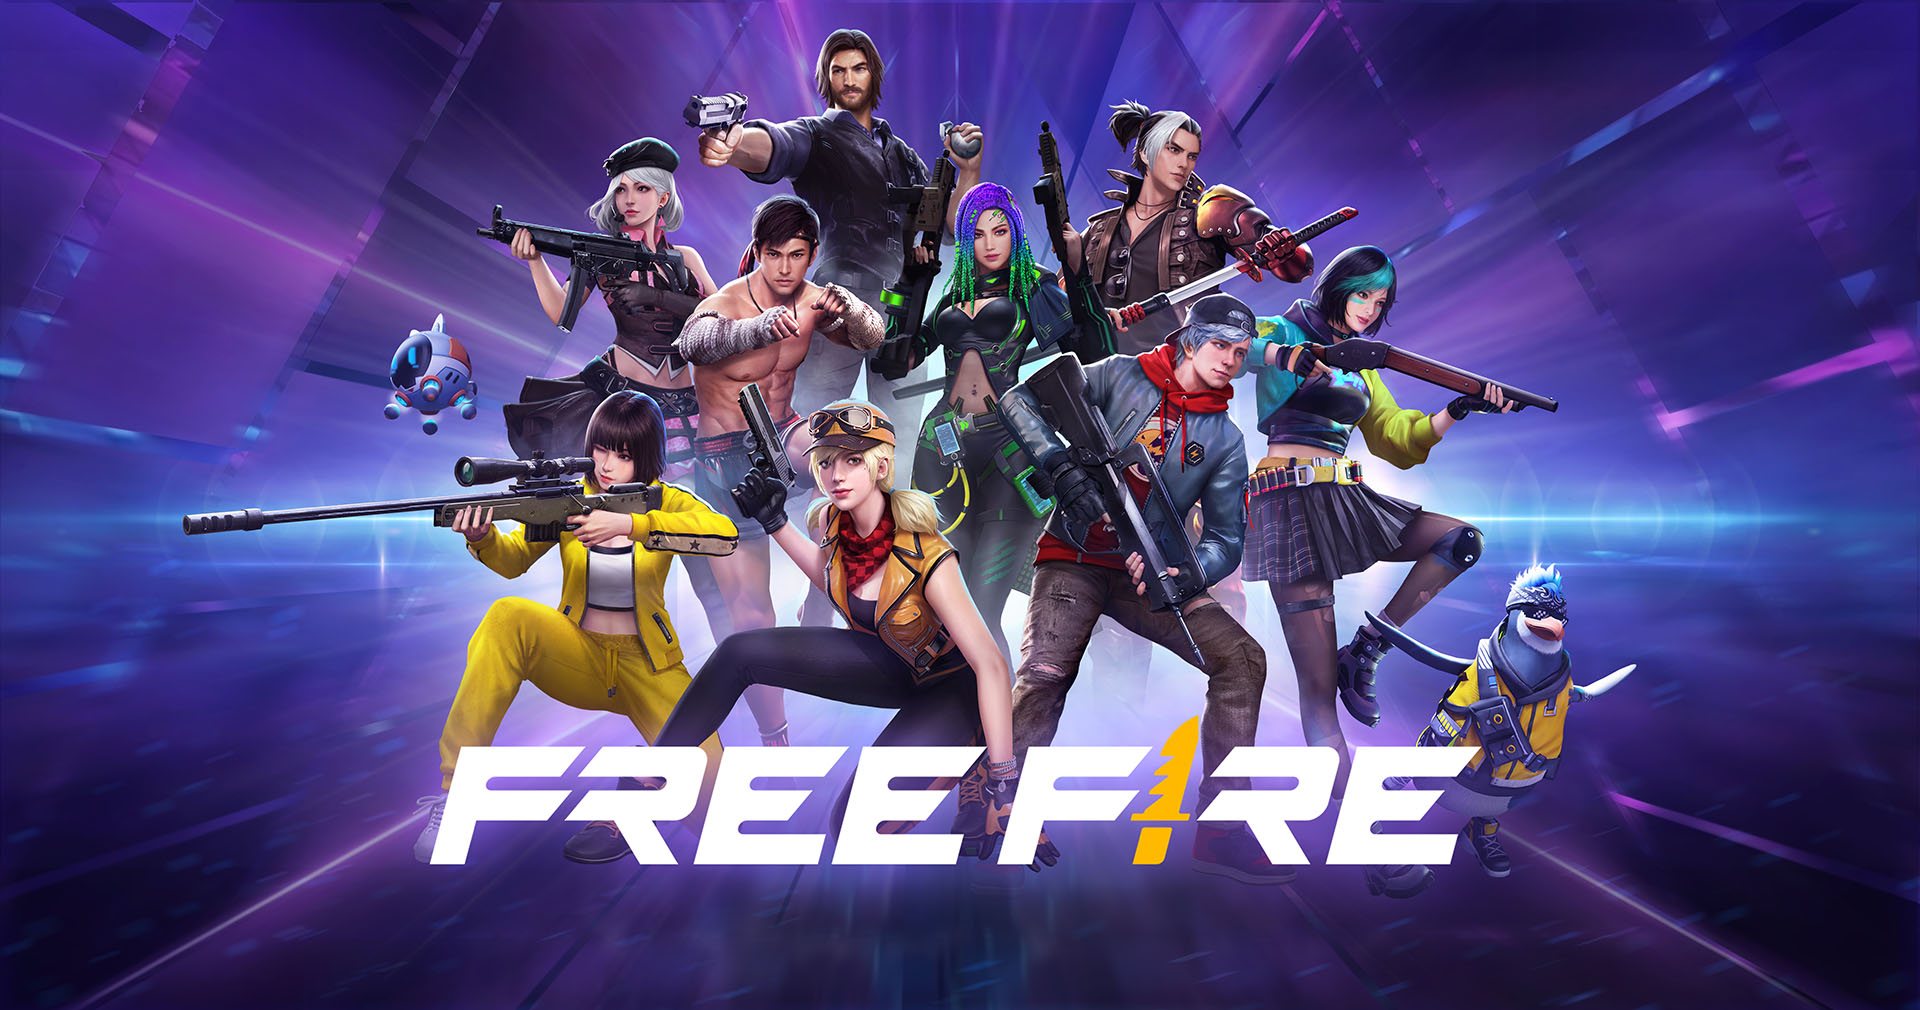 Free Fire Gaming Logo Hd Wallpapers